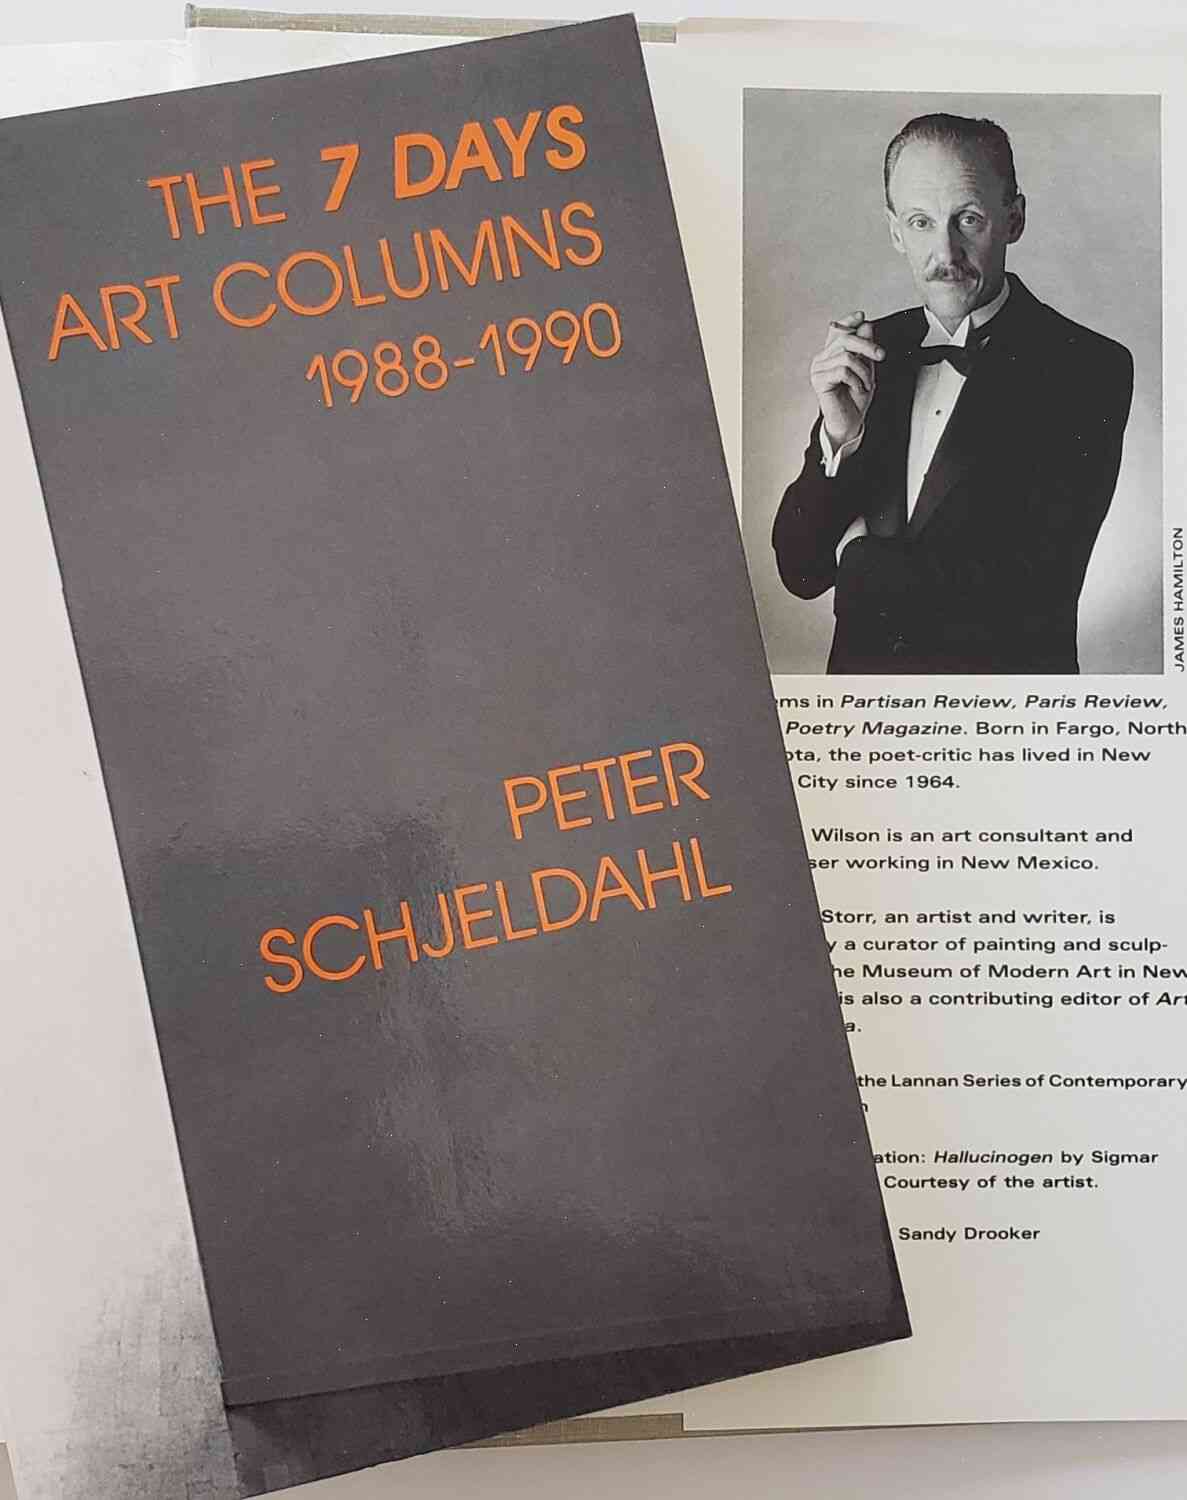 Peter Schjeldahl, the art critic for The New Yorker, died this week at 82